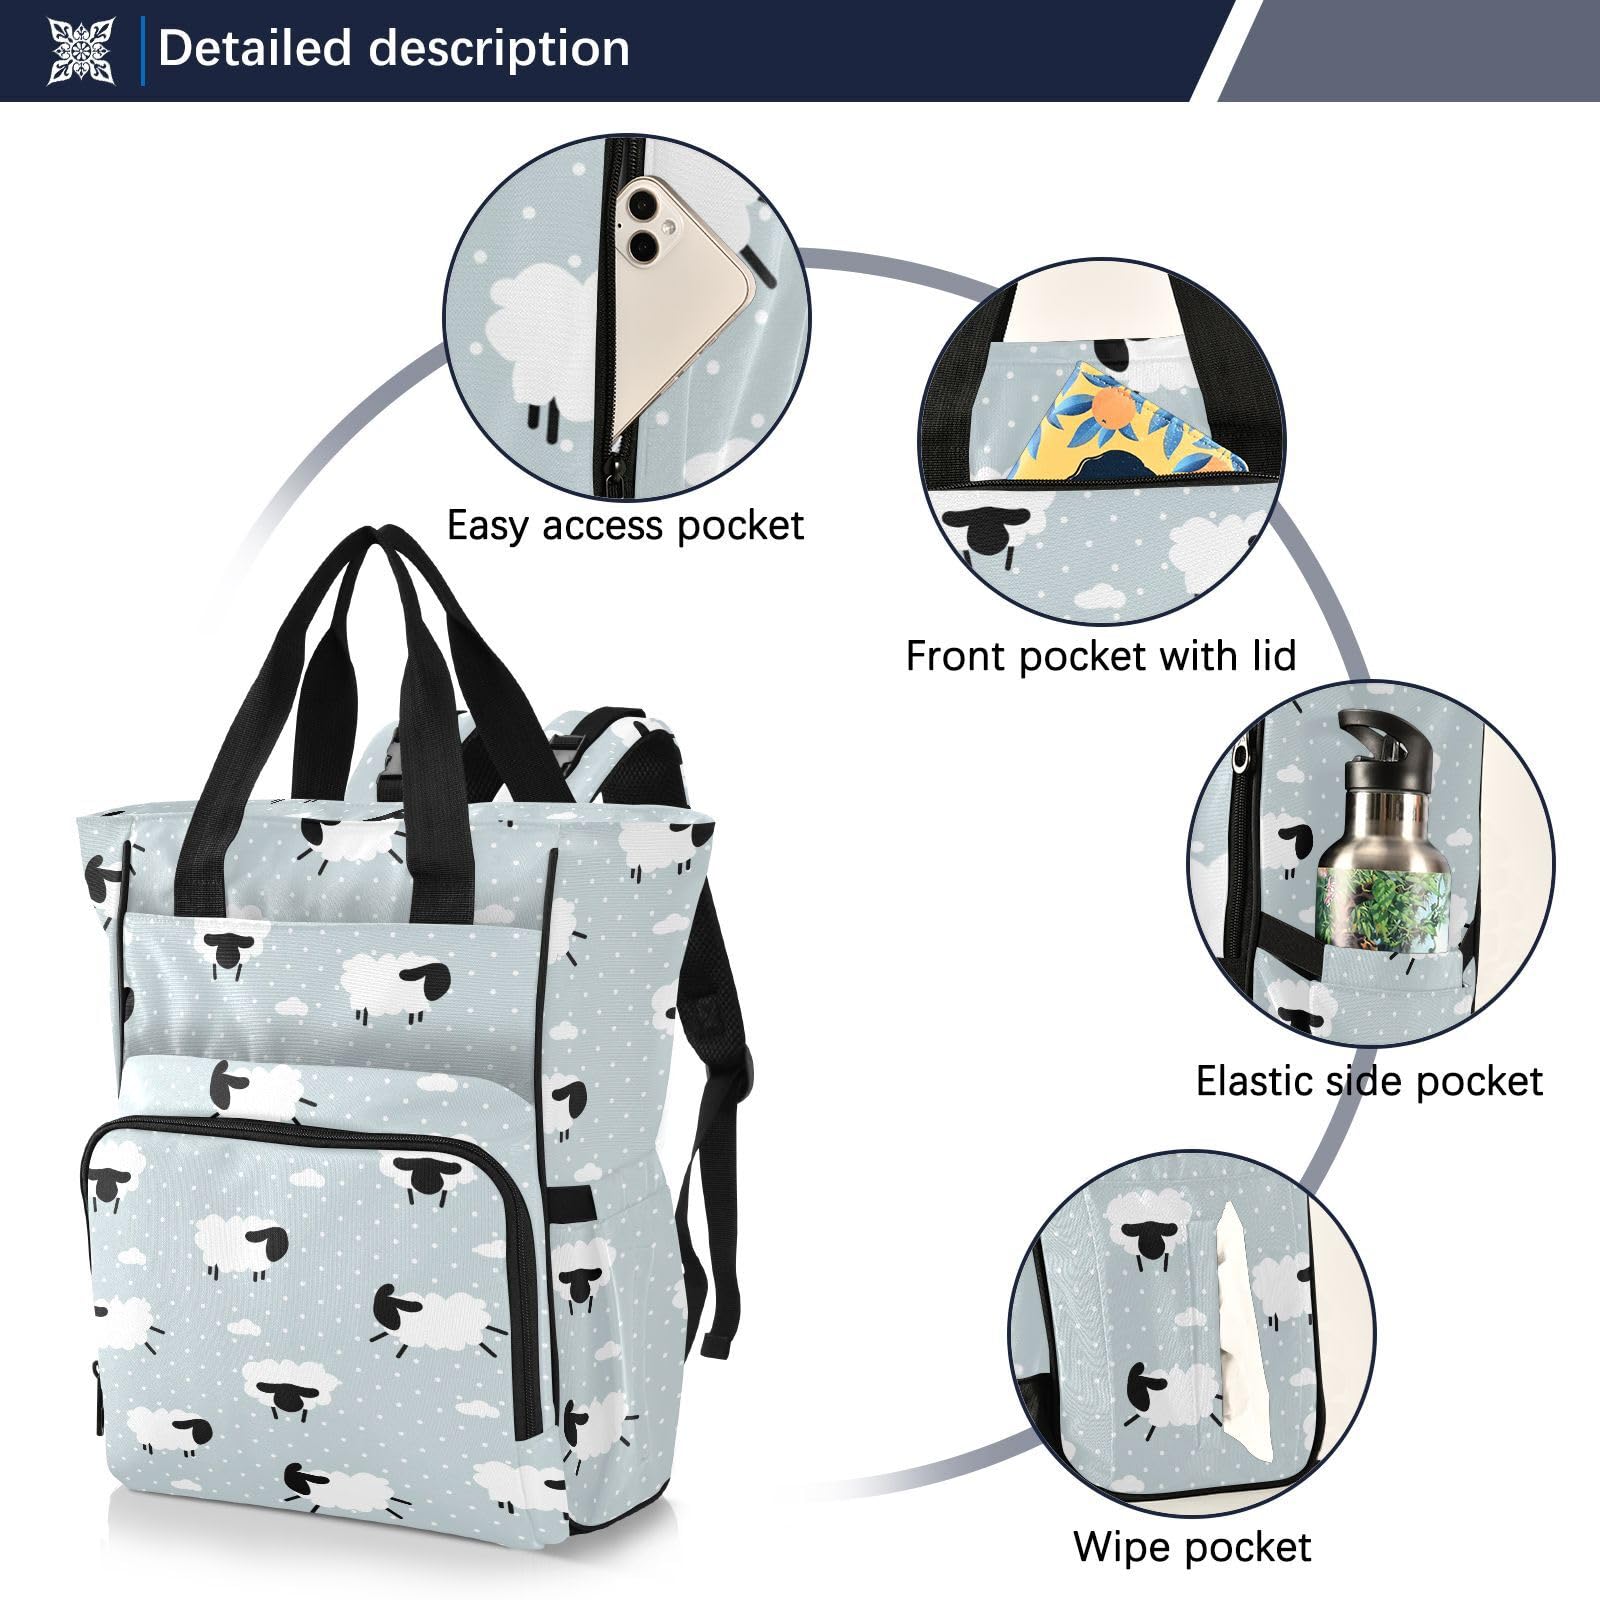 innewgogo Dot Sheep Clouds Diaper Bag Backpack for Baby Boy Girl Large Capacity Baby Changing Totes with Three Pockets Multifunction Travel Baby Bag for Travelling Picnicking